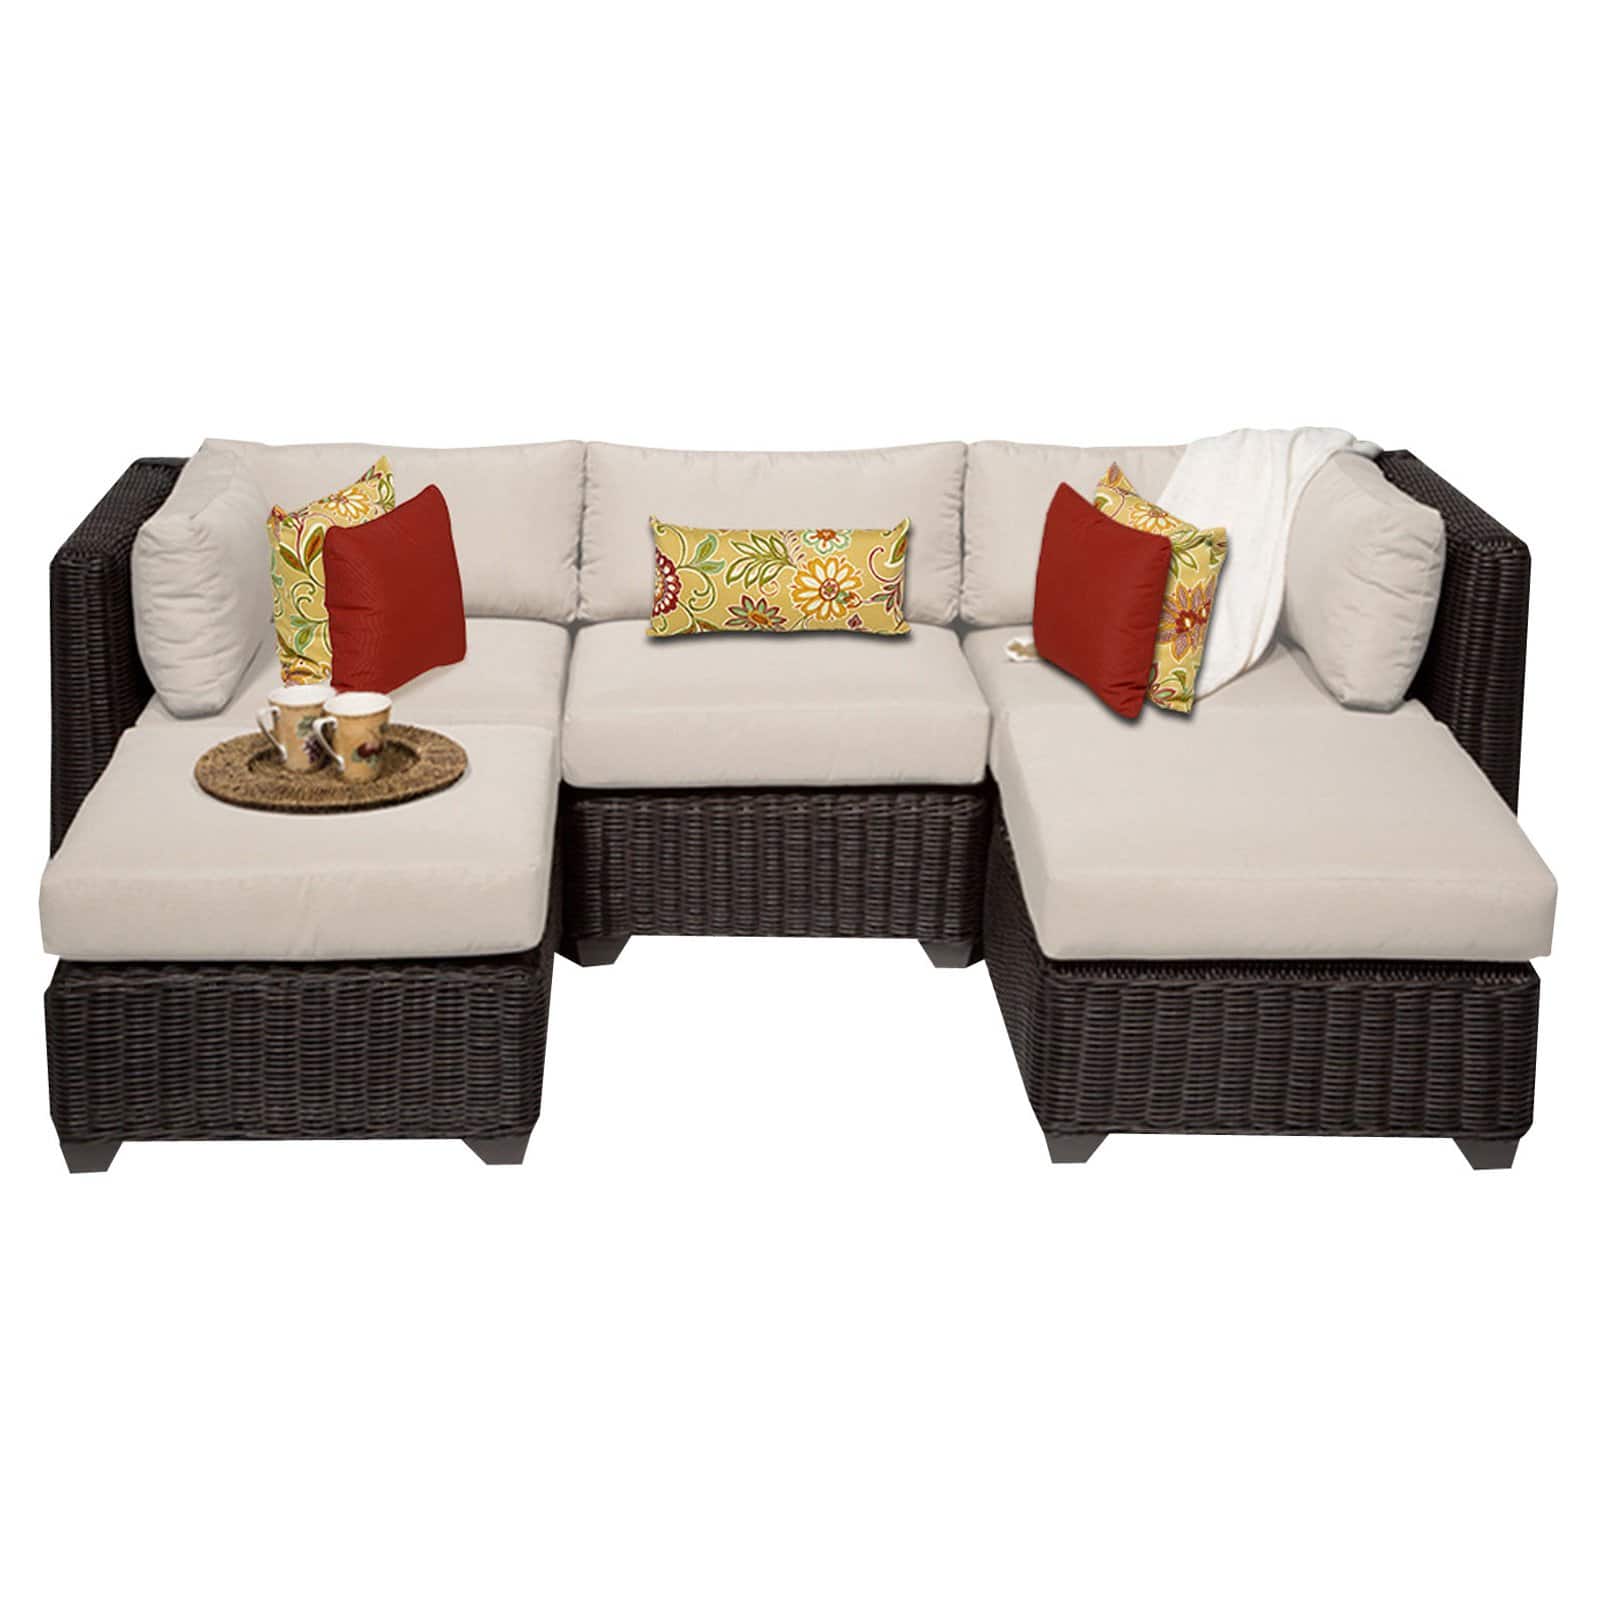 TK Classics Venice Wicker 5 Piece Patio Conversation Set with 2 Sets of Cushion Covers - image 2 of 3